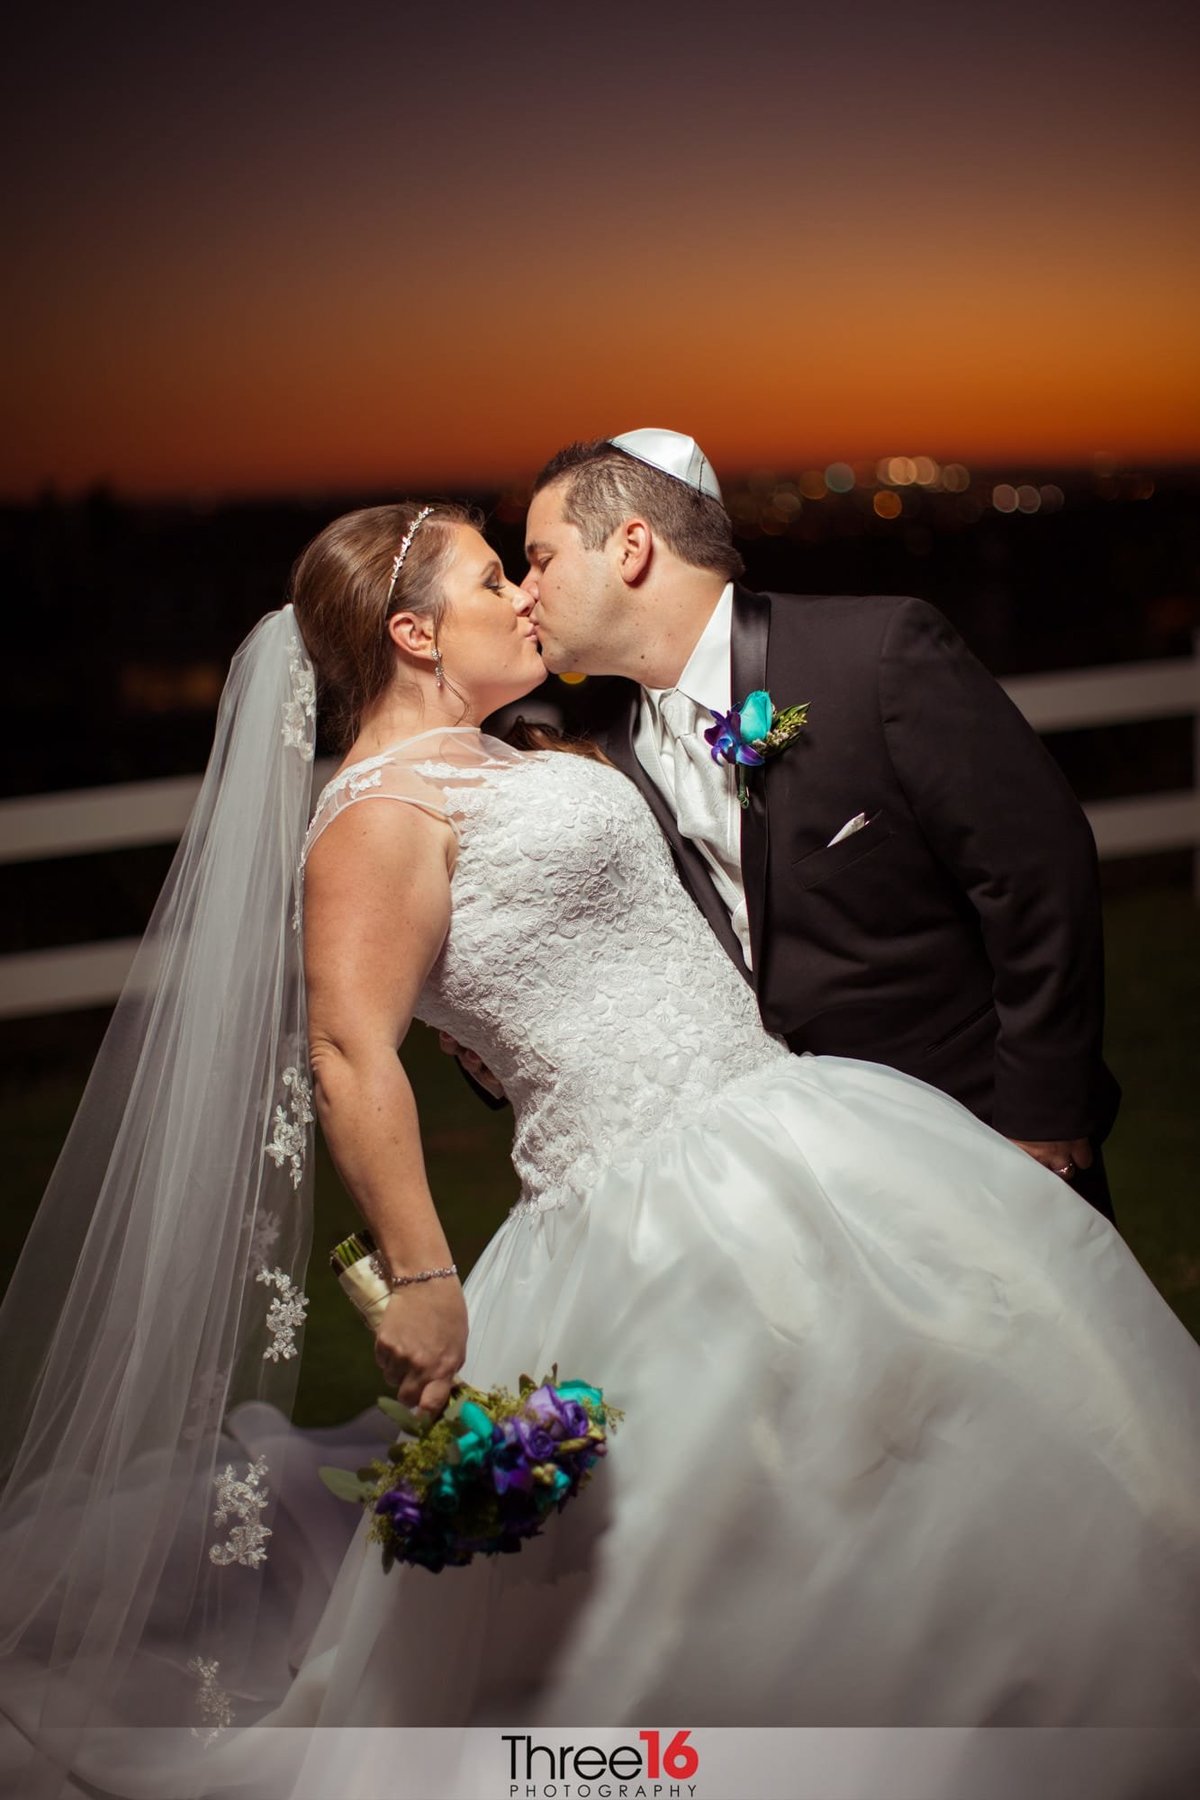 Groom dips his Bride and kisses her during photo session with a beautiful sunset in the background